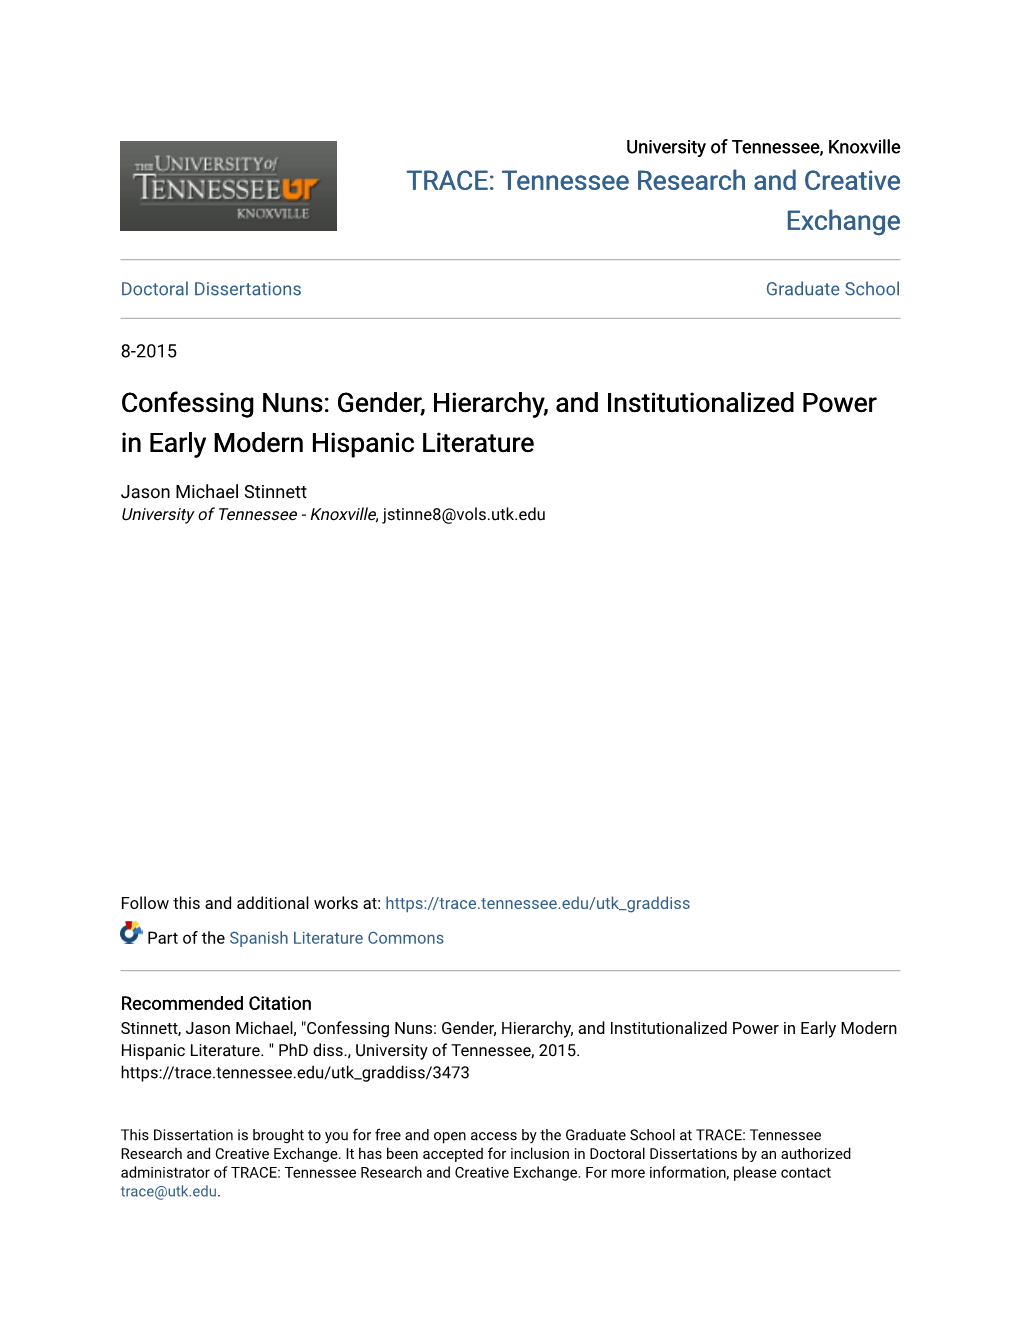 Confessing Nuns: Gender, Hierarchy, and Institutionalized Power in Early Modern Hispanic Literature